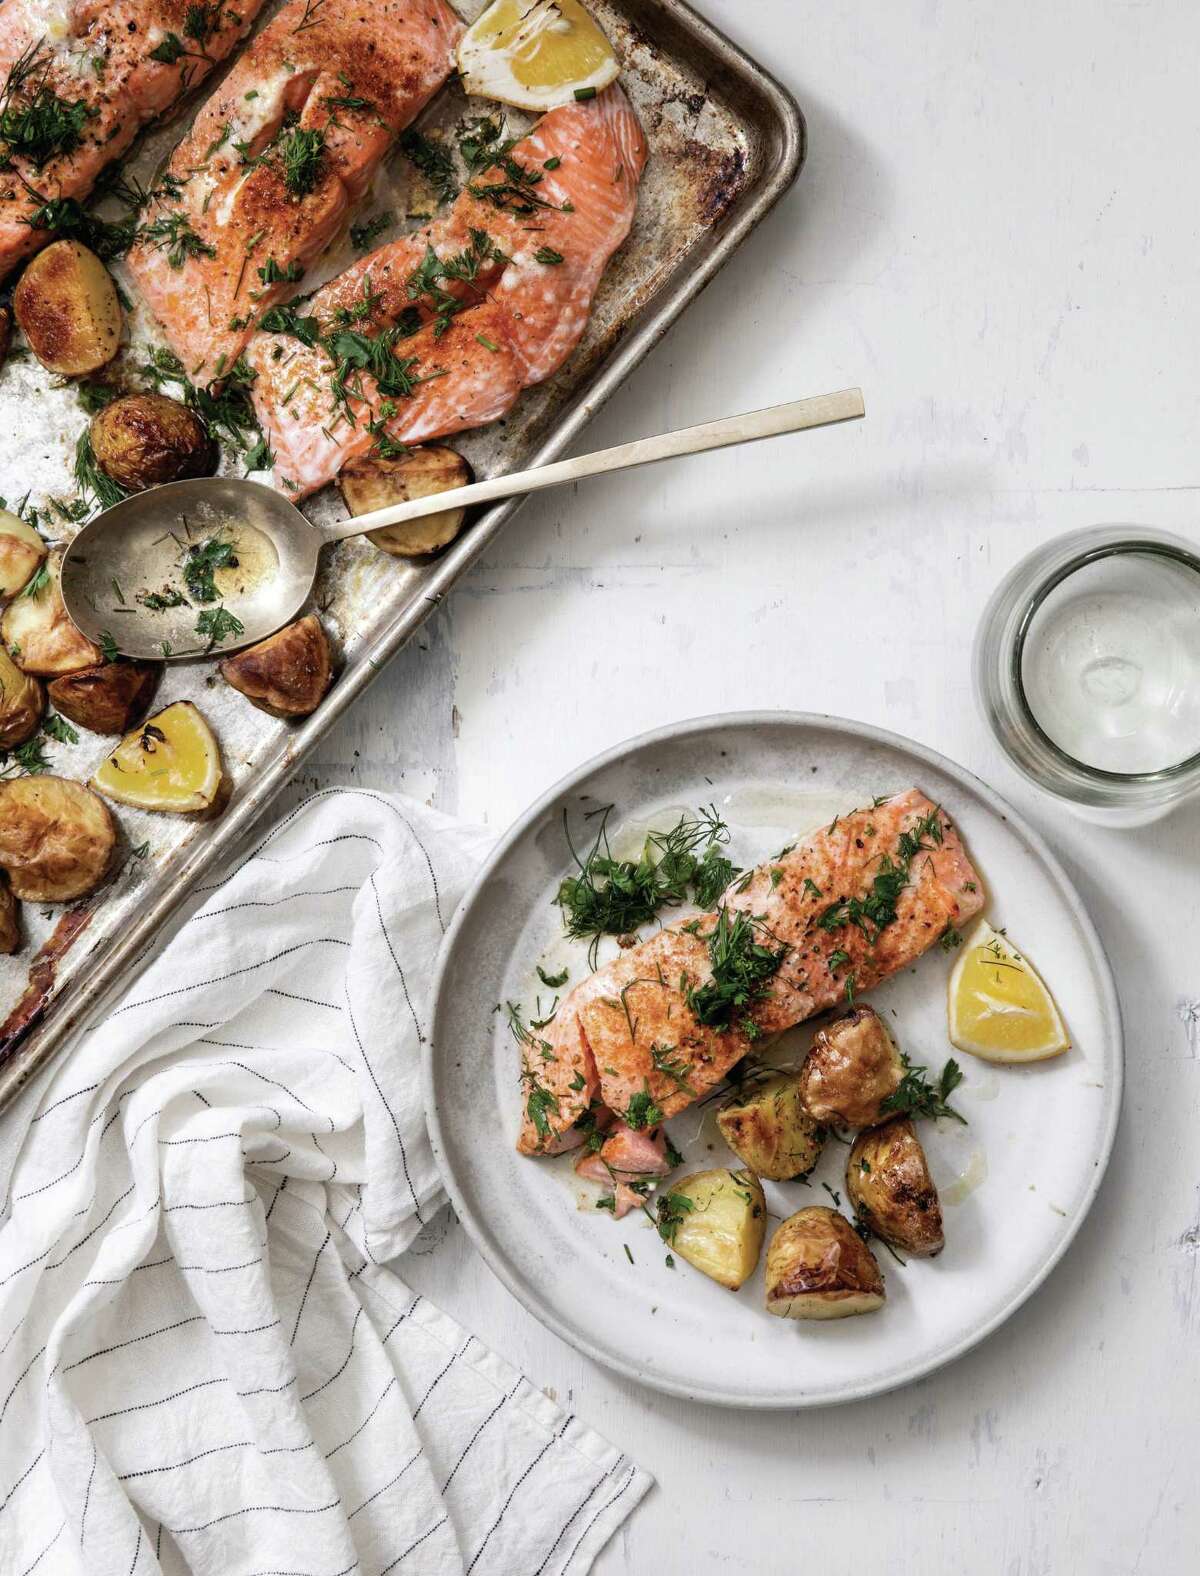 Weeknight Salmon is a recipe from "Magnolia Table: Volume 2" by Joanna Gaines.